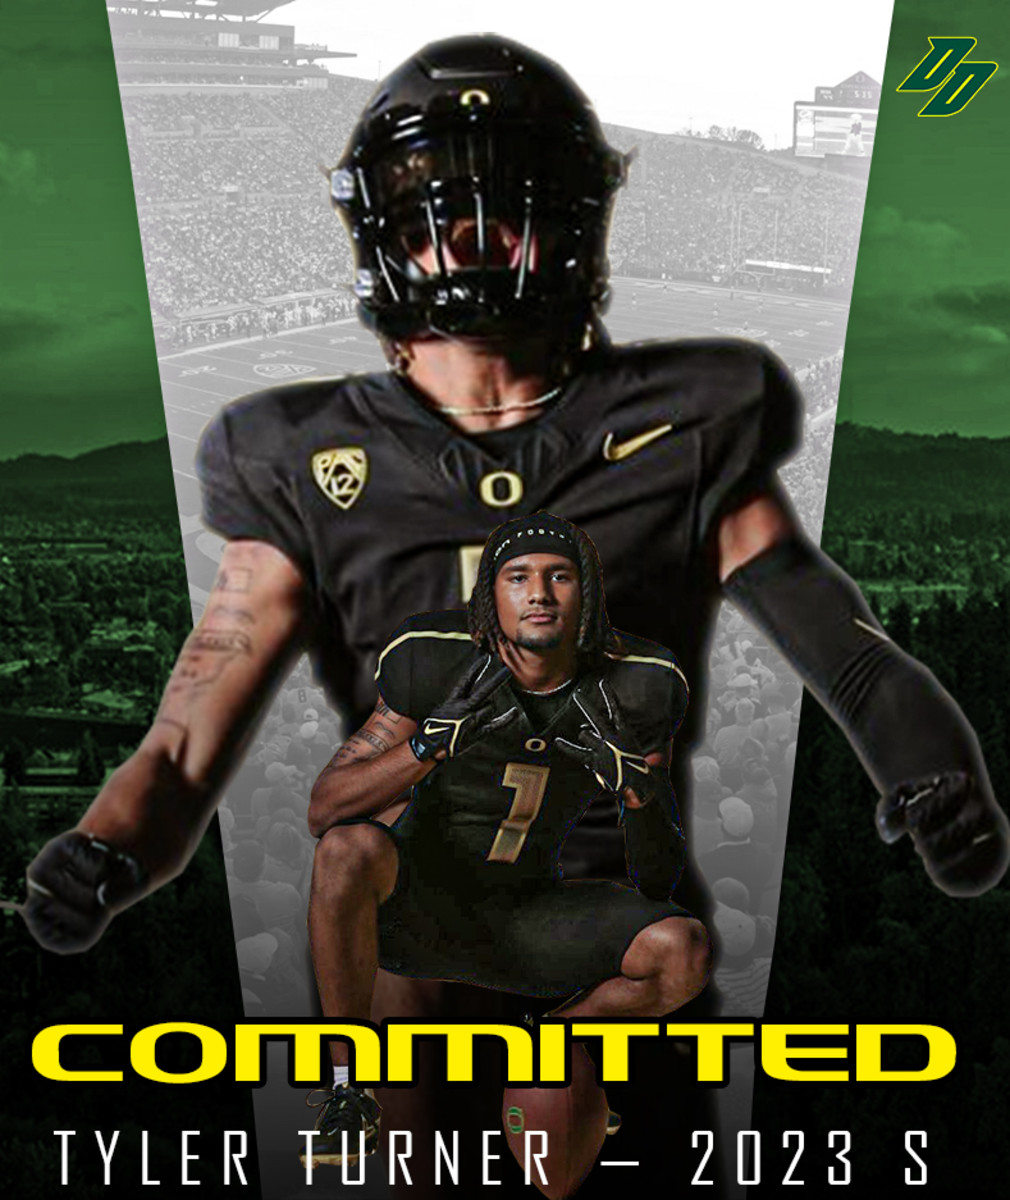 Tyler Turner reunites with Matt Powledge in Eugene after previously being committed to Baylor.